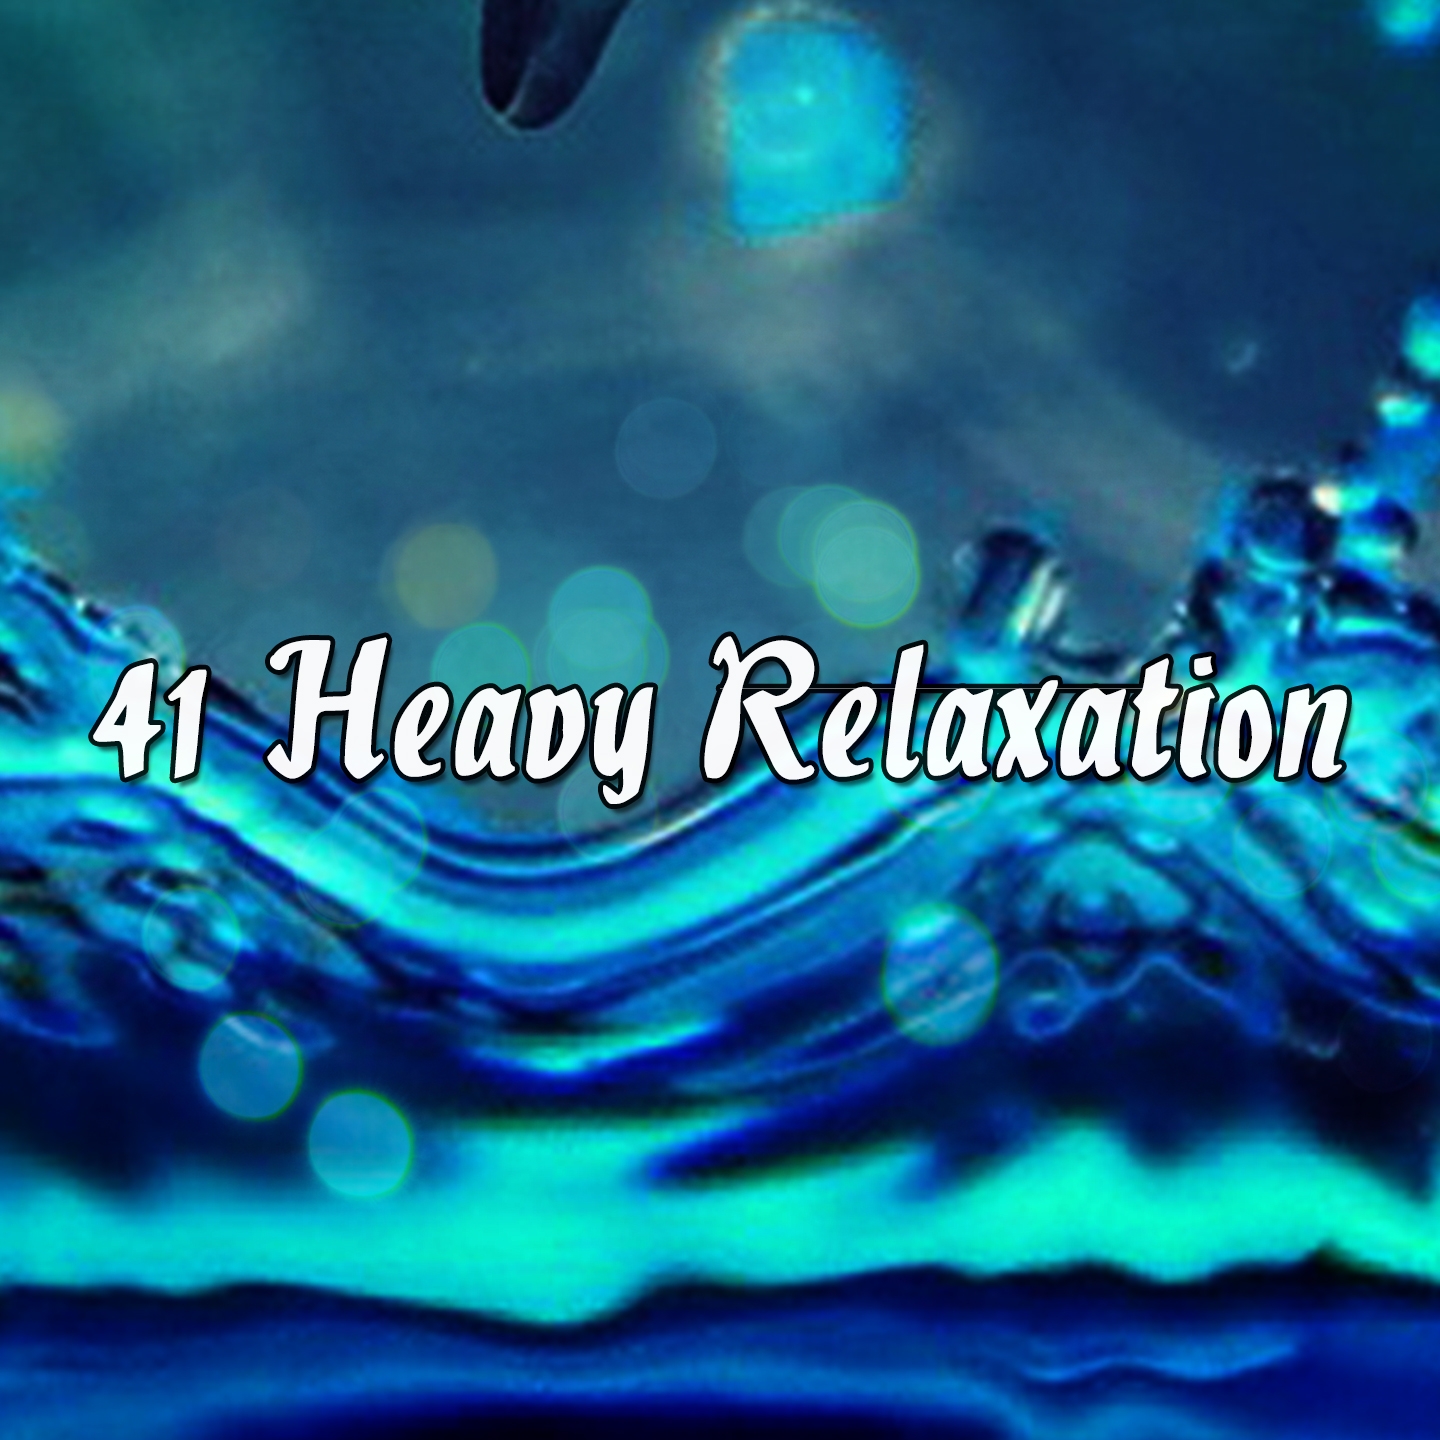 41 Heavy Relaxation